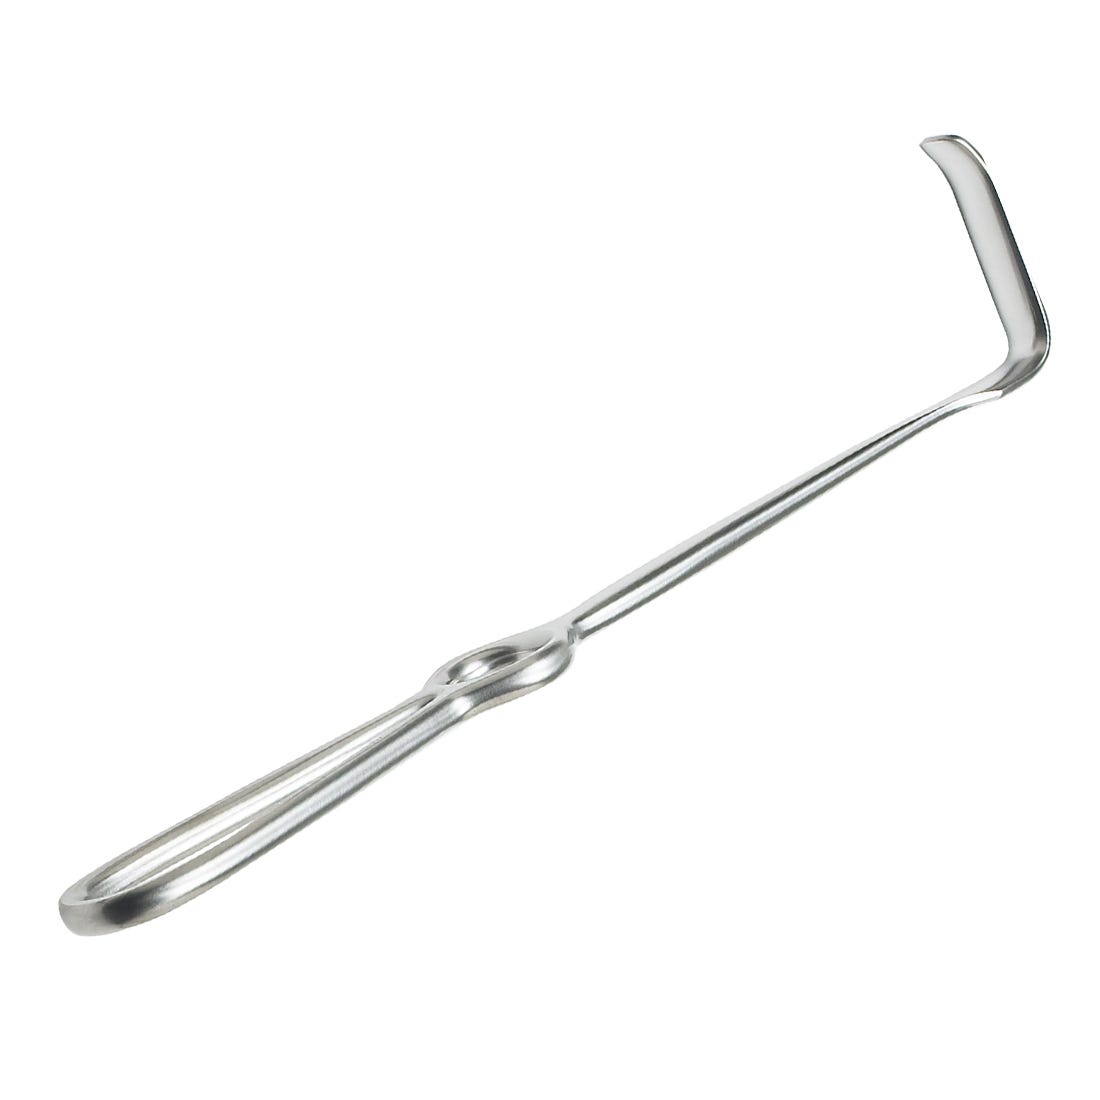 Obwegeser Type Surgical Retractor Concave, Curved Down, 10mm x 42mm